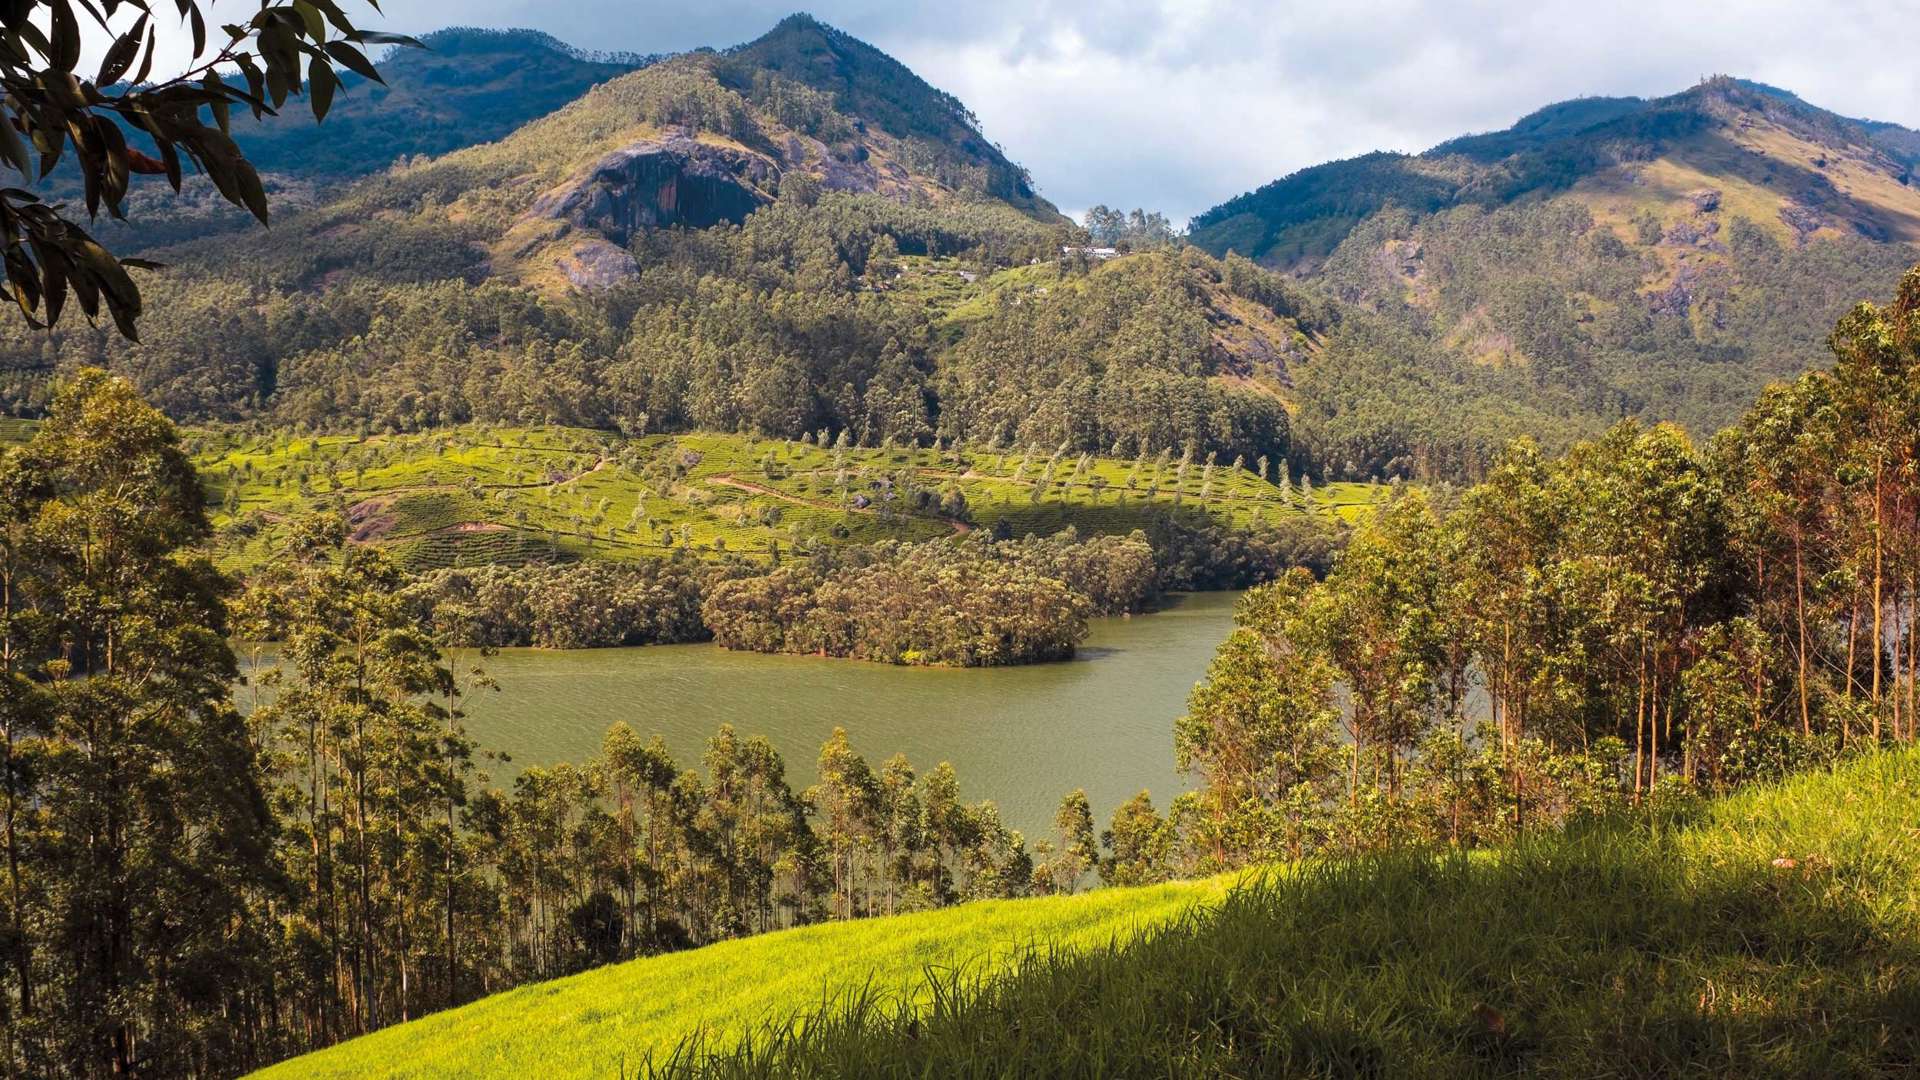 A Hilltop View Of Periyar Lake In The Western Ghats Of South India